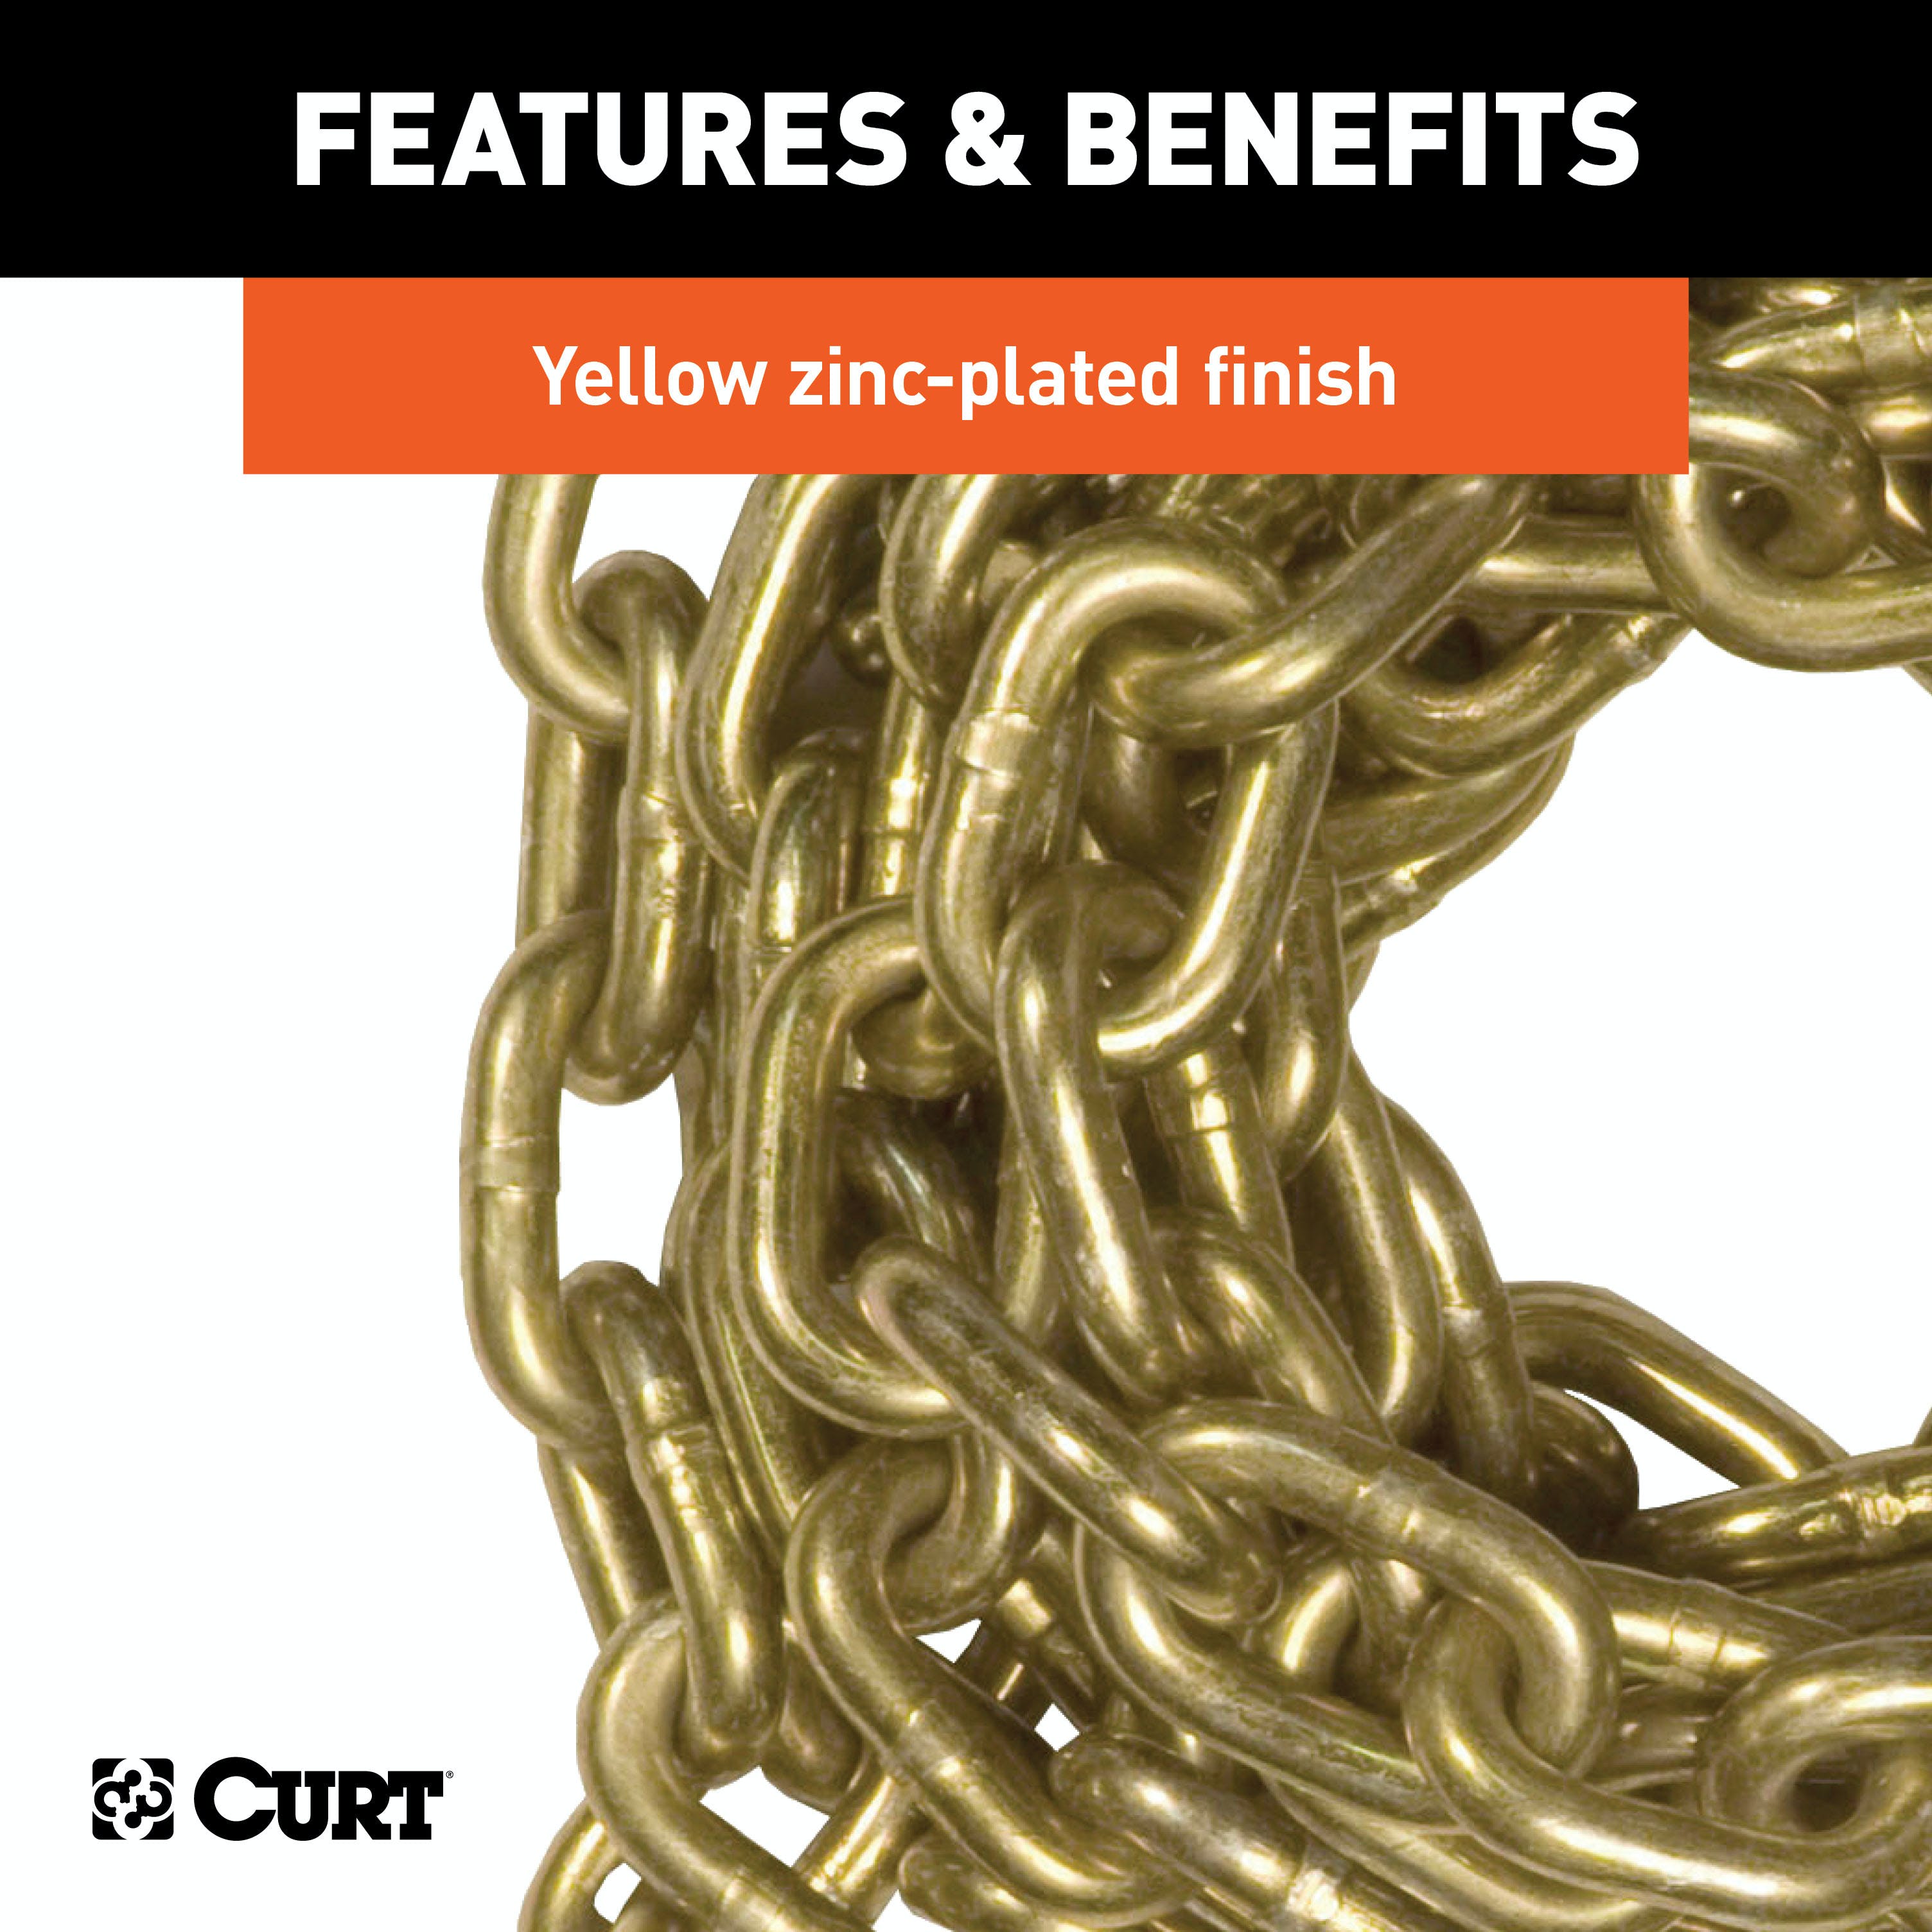 CURT 80308 25' Transport Binder Safety Chain with 2 Clevis Hooks (18,800 lbs, Yellow Zinc)